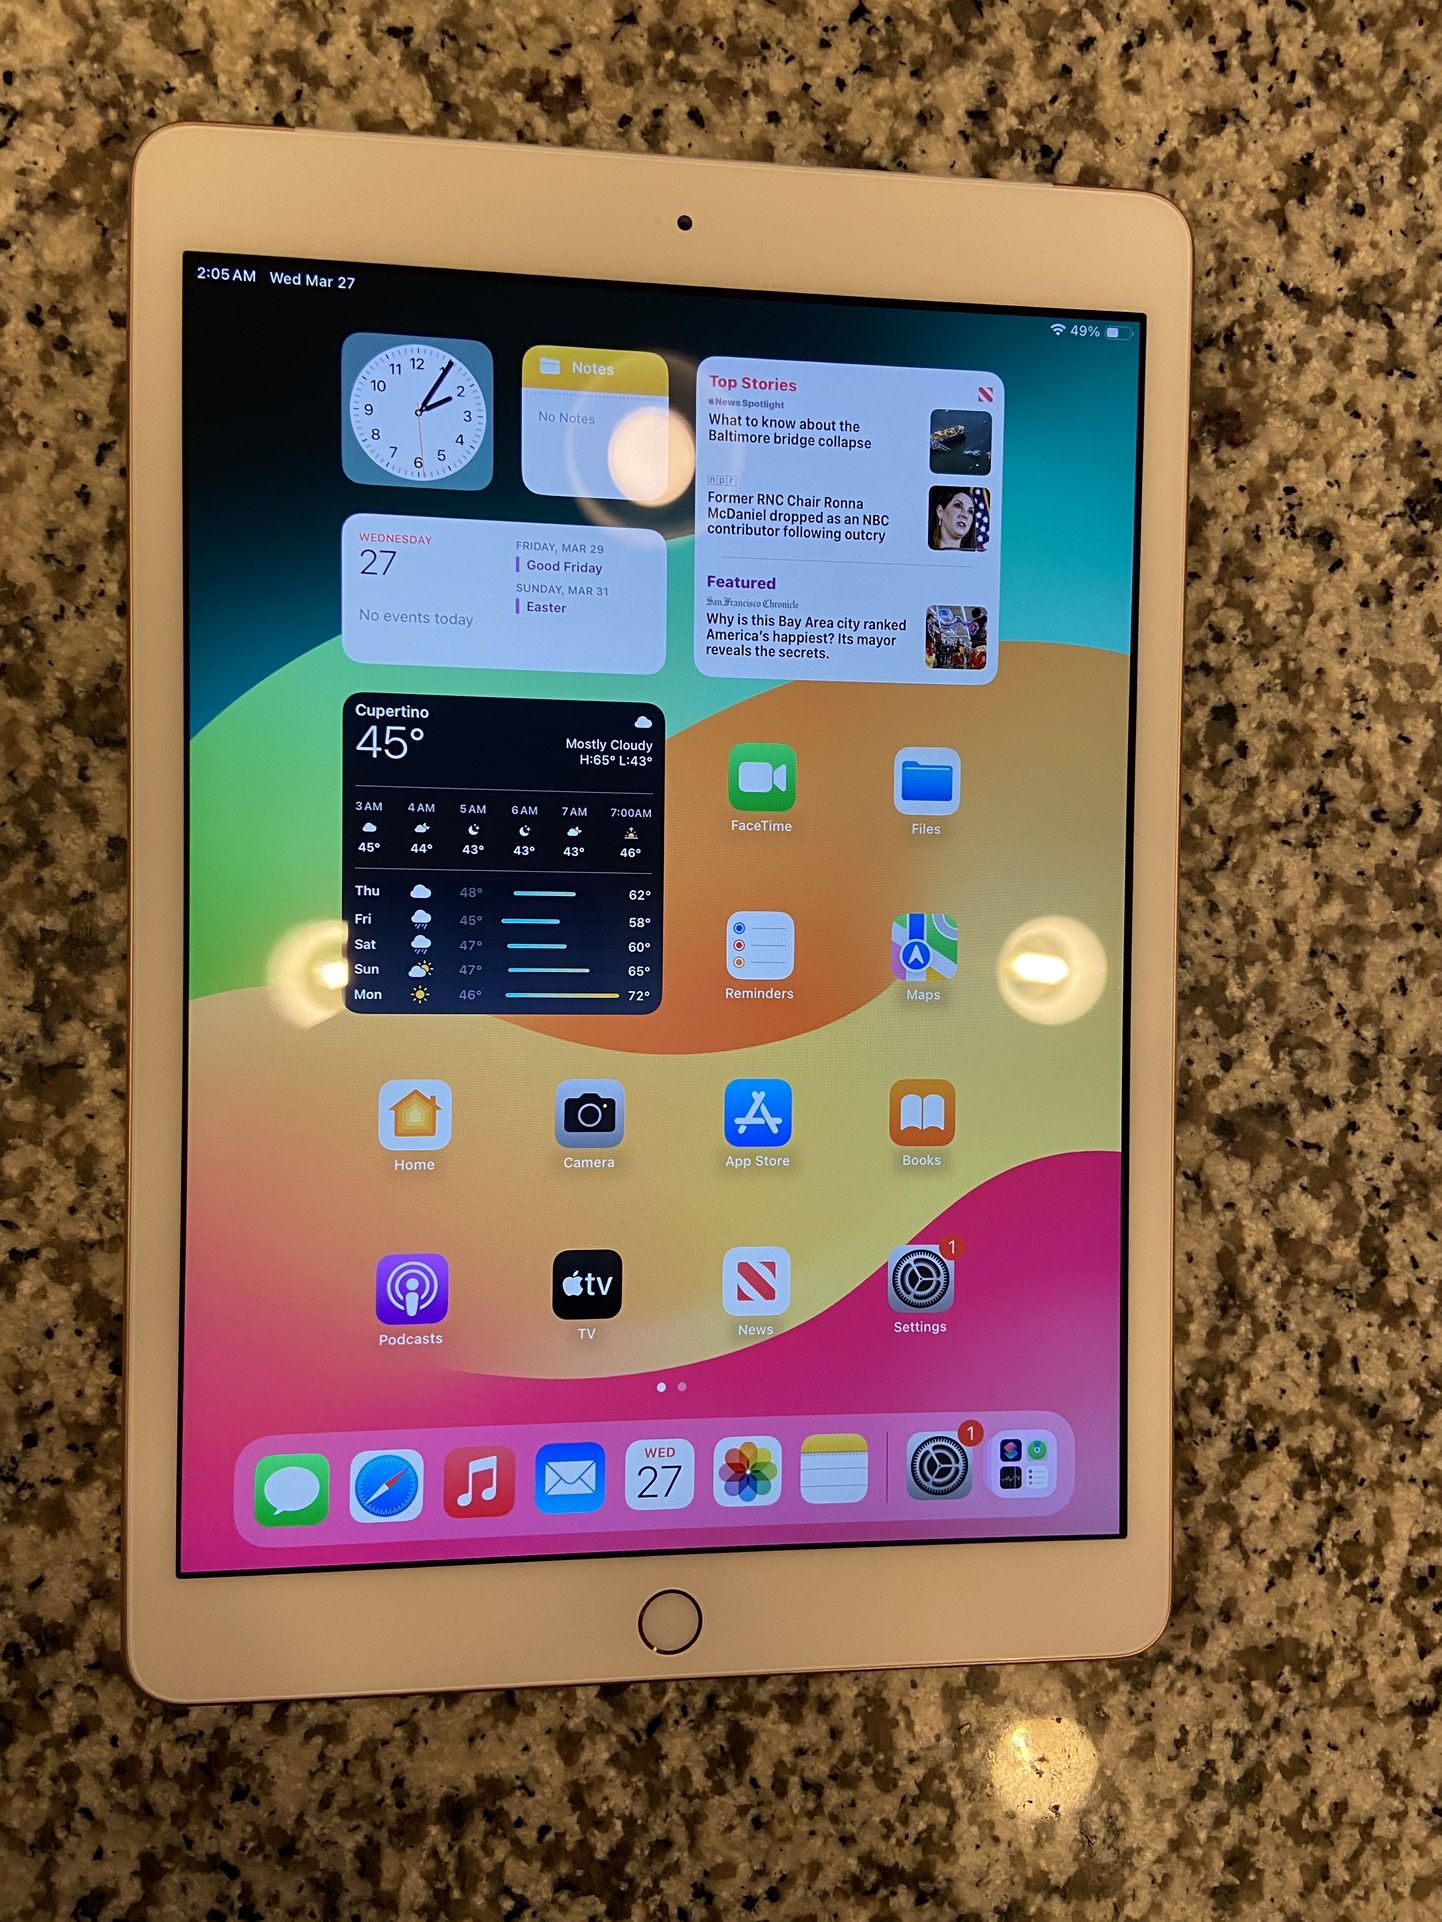 Apple iPad 7th Generation 32gb Gold  Wi-Fi + Cellular Unlocked - Very Good Condition - Works Great - 